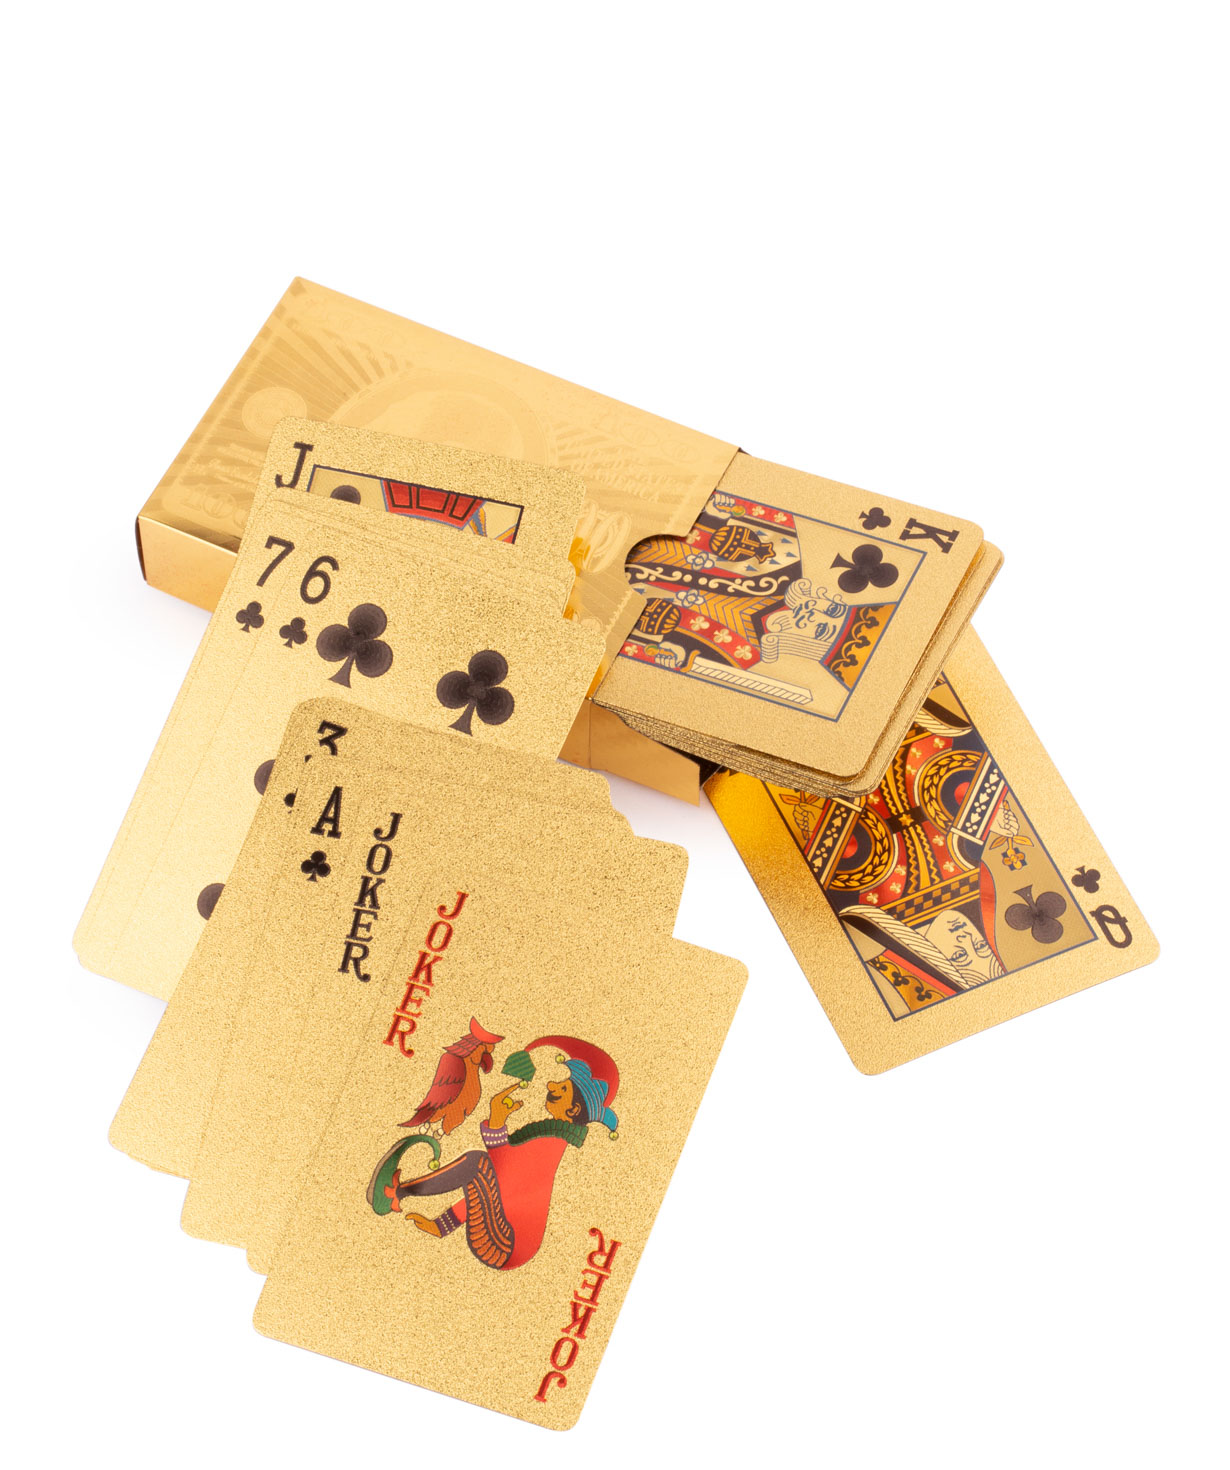 Playing cards `Creative Gifts` in a wooden box